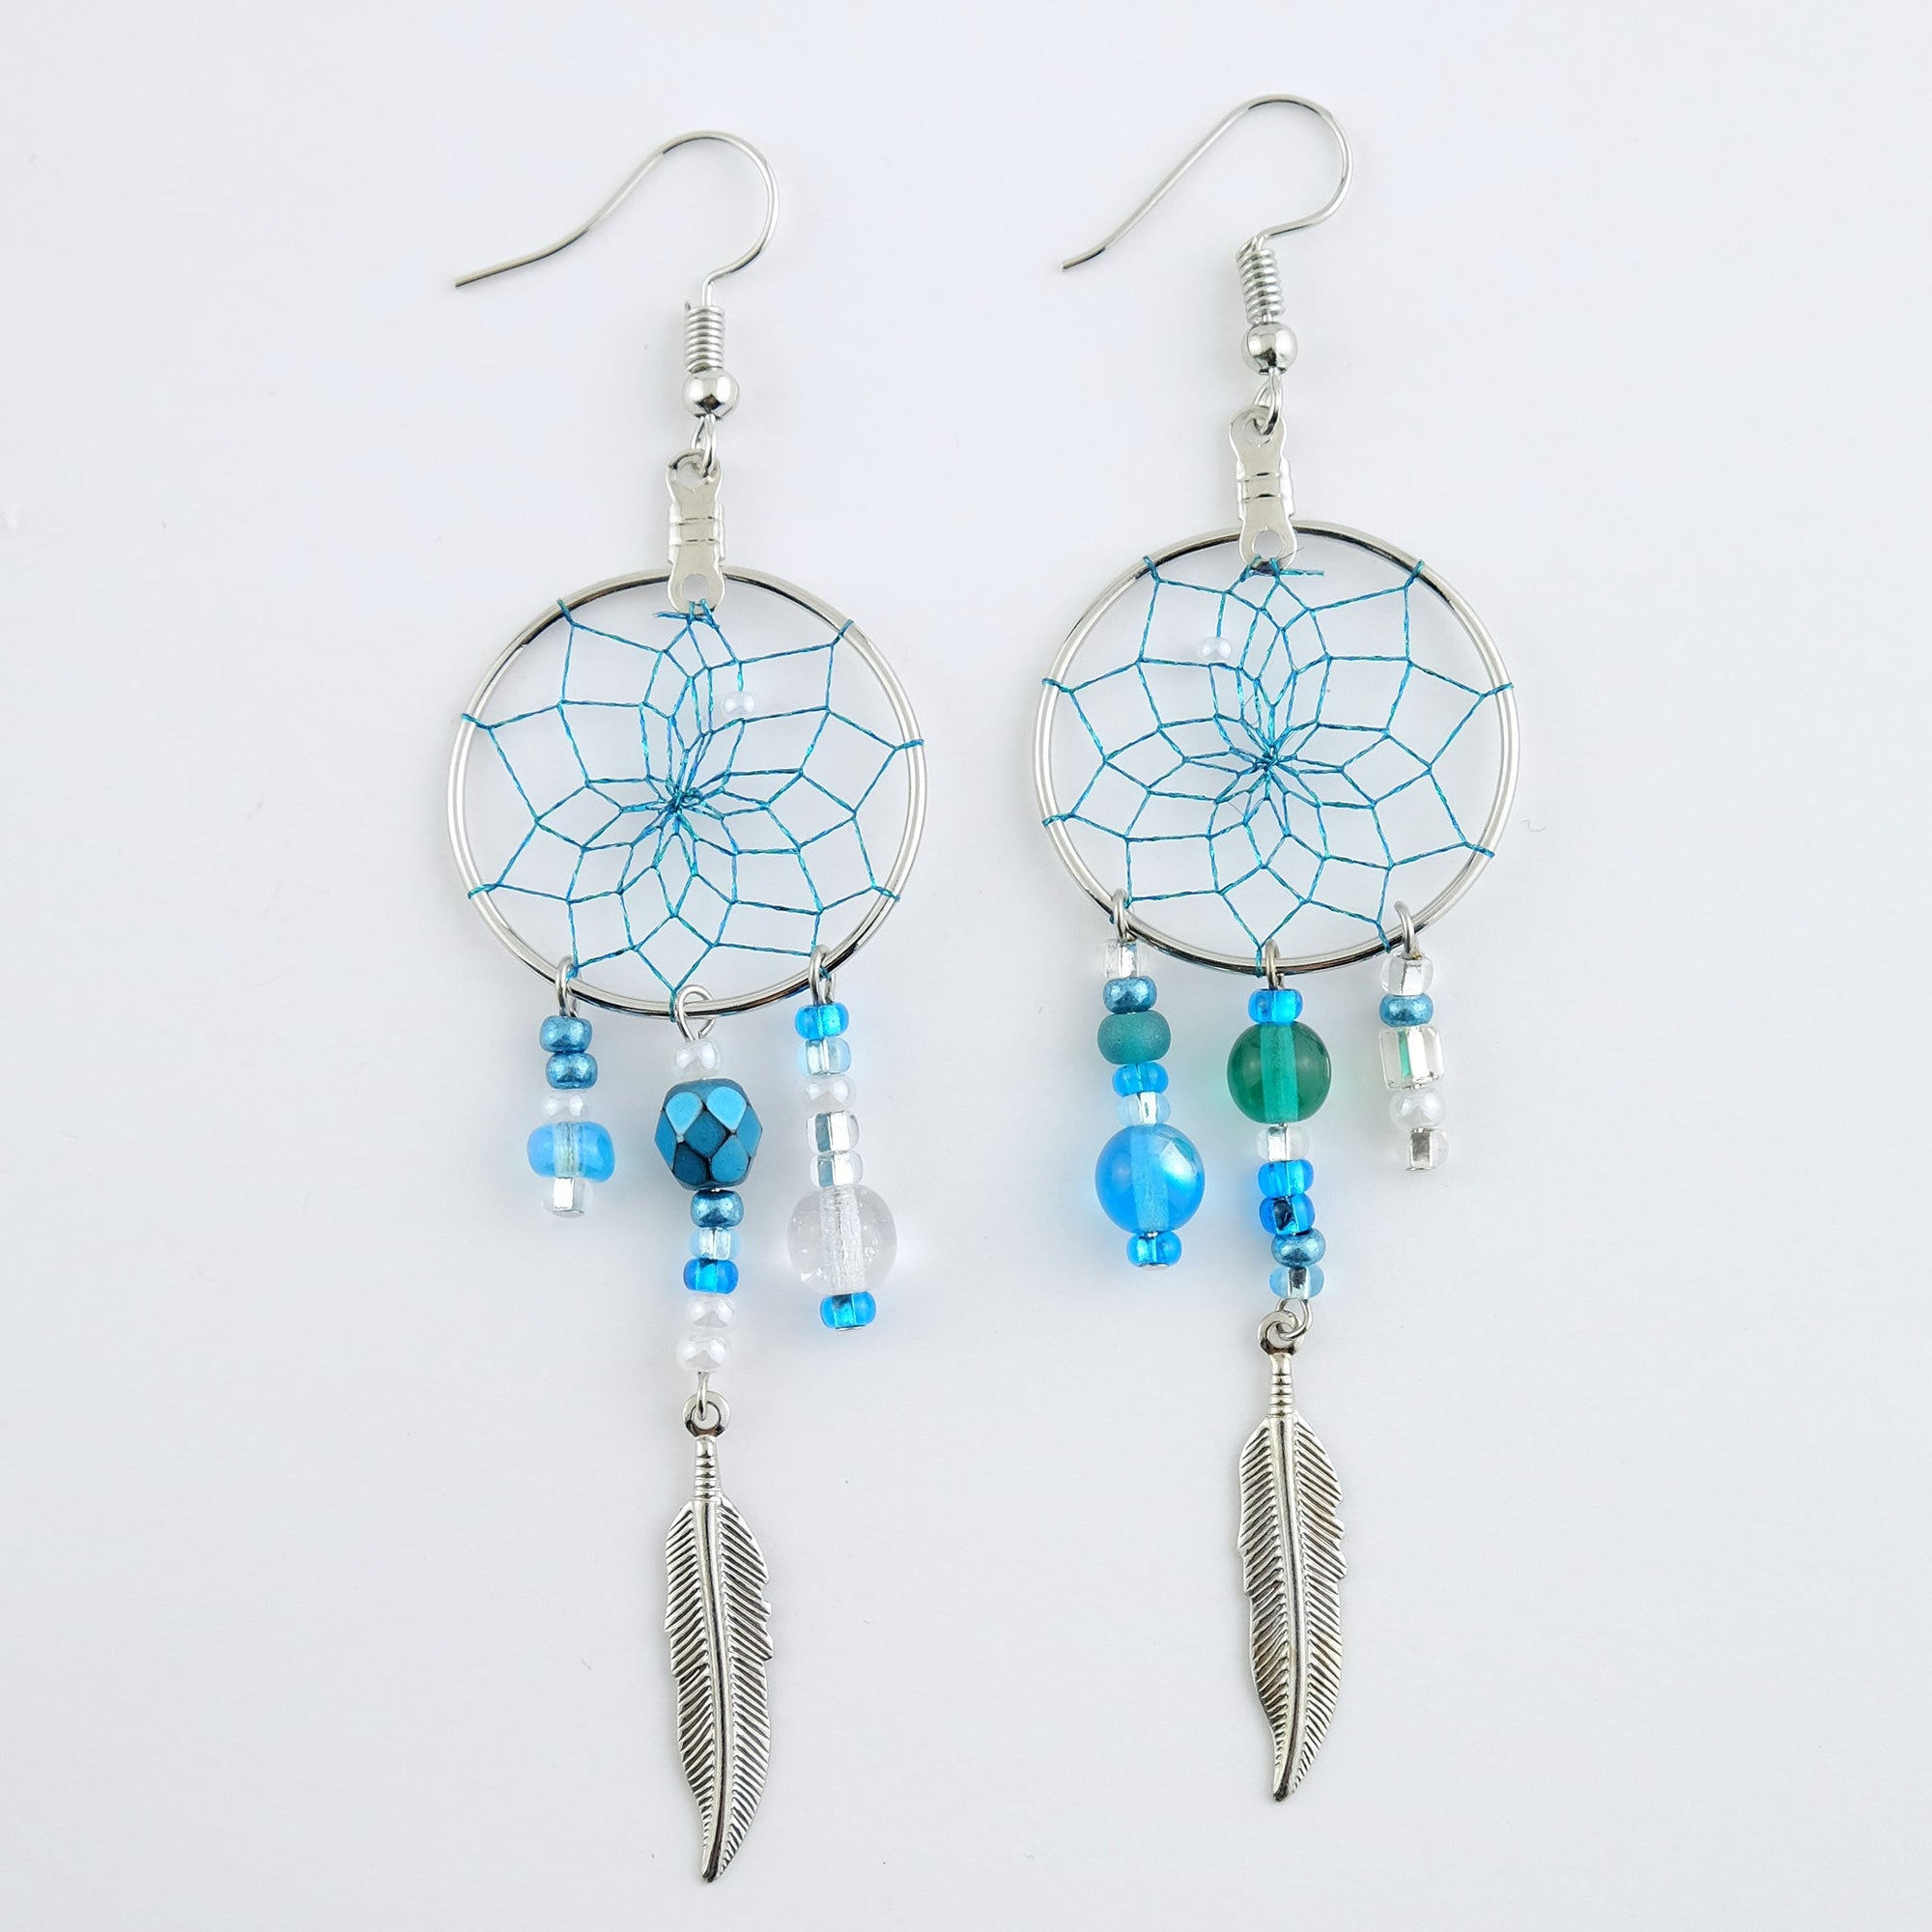 Magical 1" Dream Catcher Earrings Jewellery "Turquoise/Green"